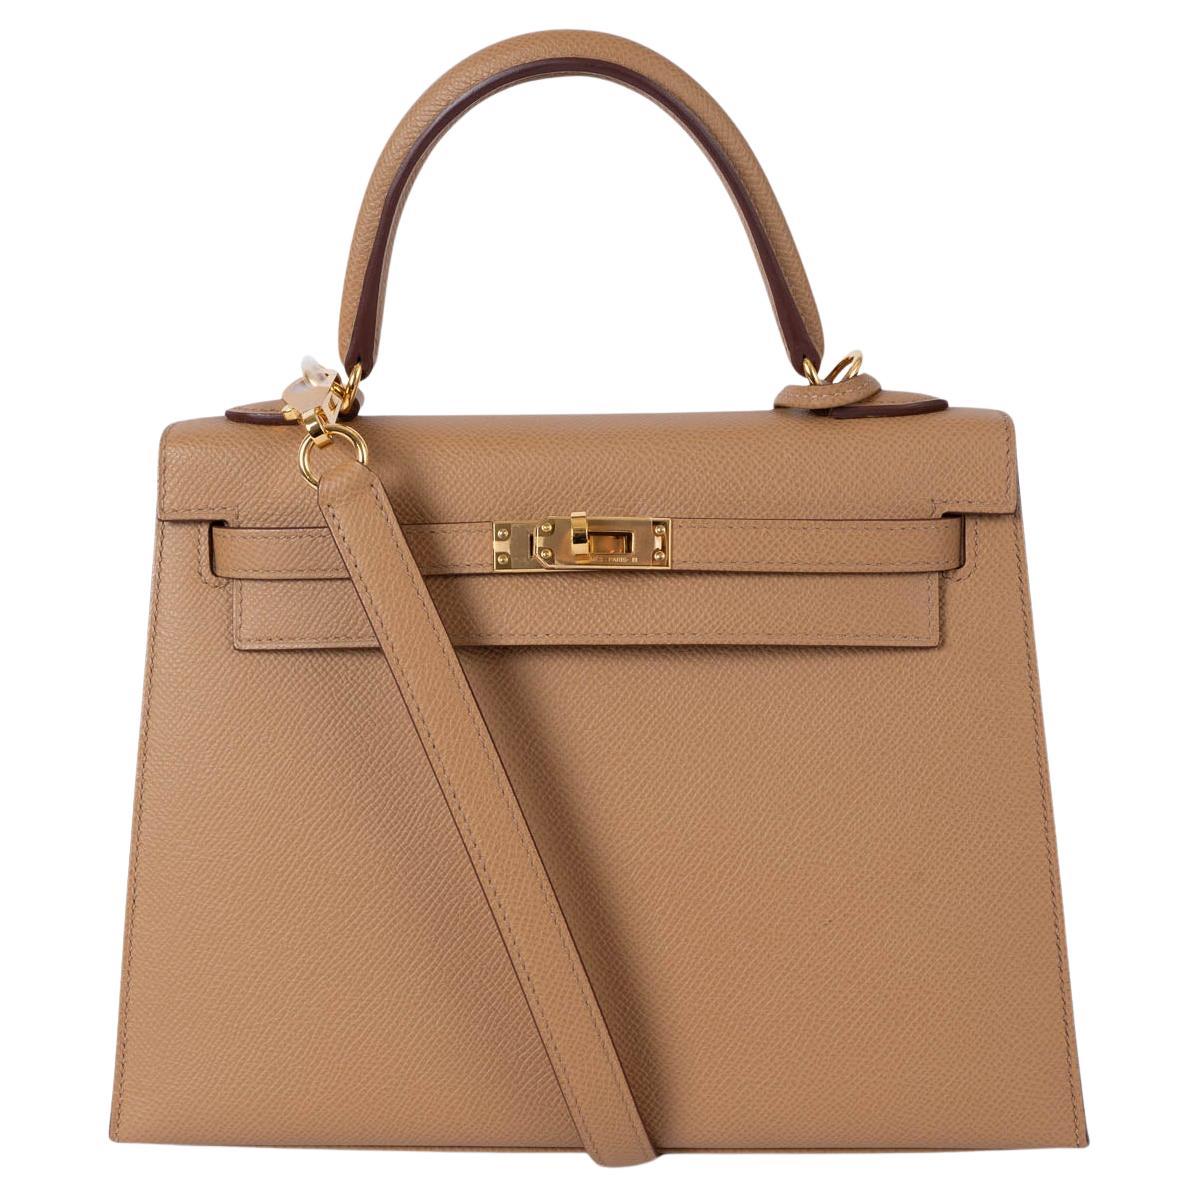 How do I know if a Kelly bag is real?